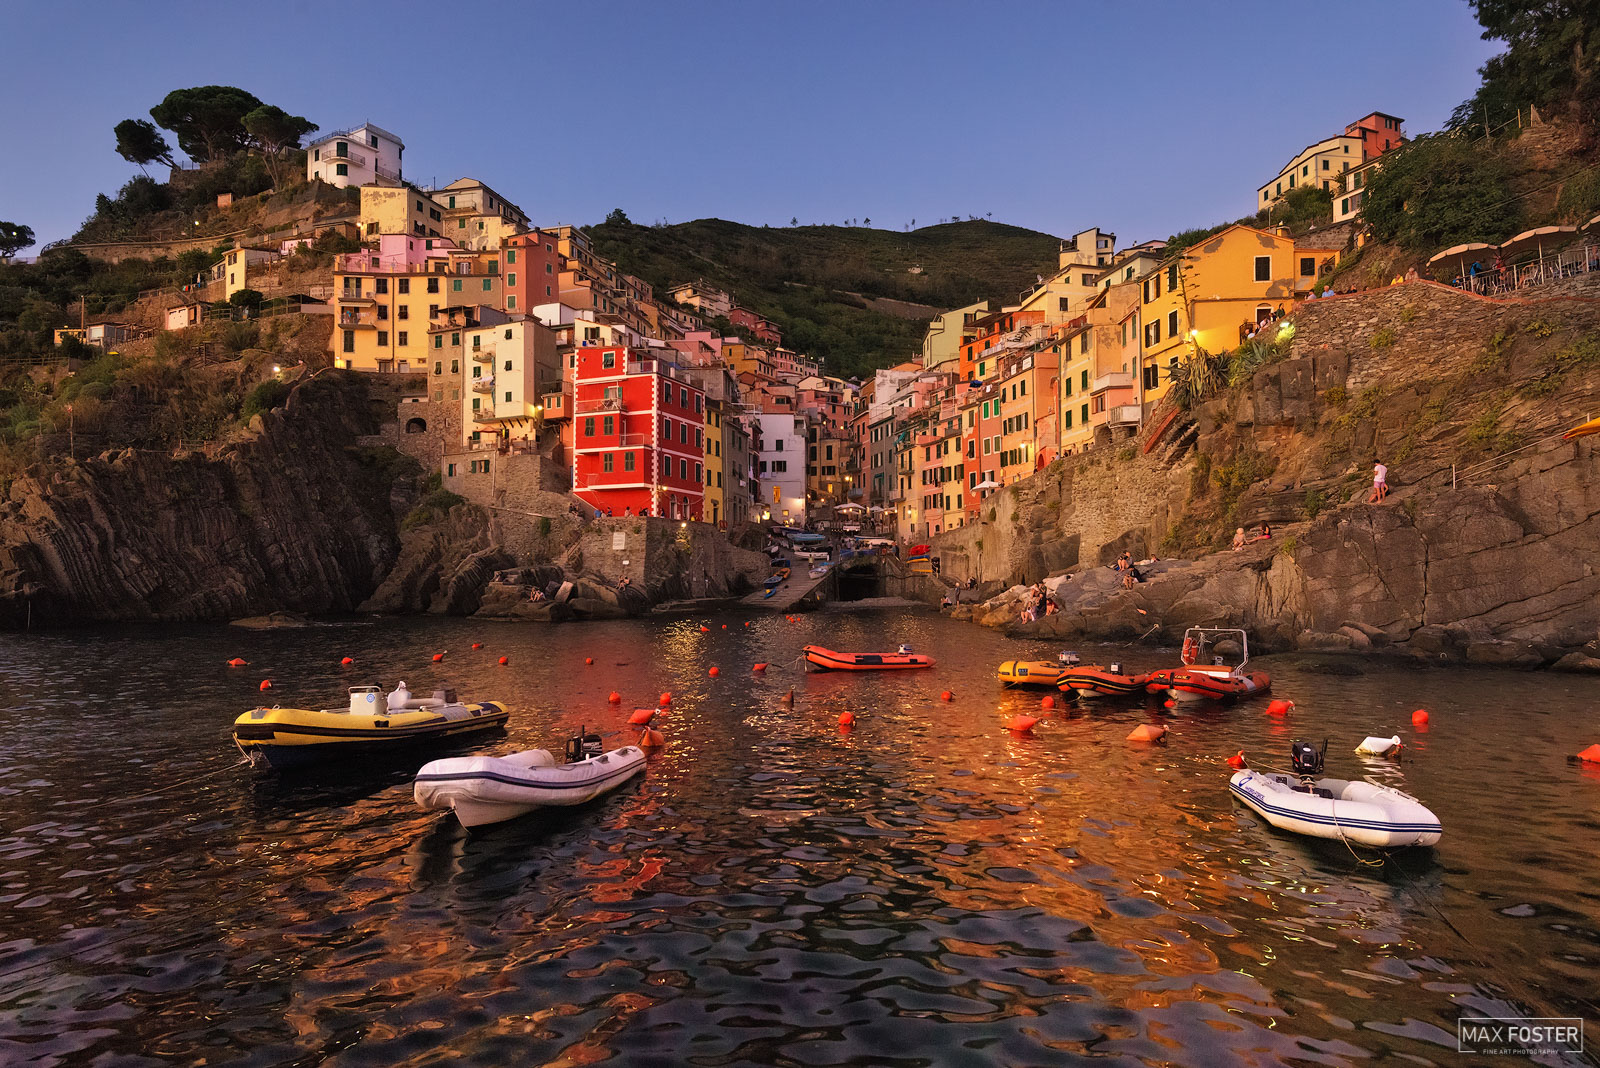 Breath new life into your home with Fisherman's Harbor, Max Foster's limited edition photography print of Riomaggiore, Cinque...